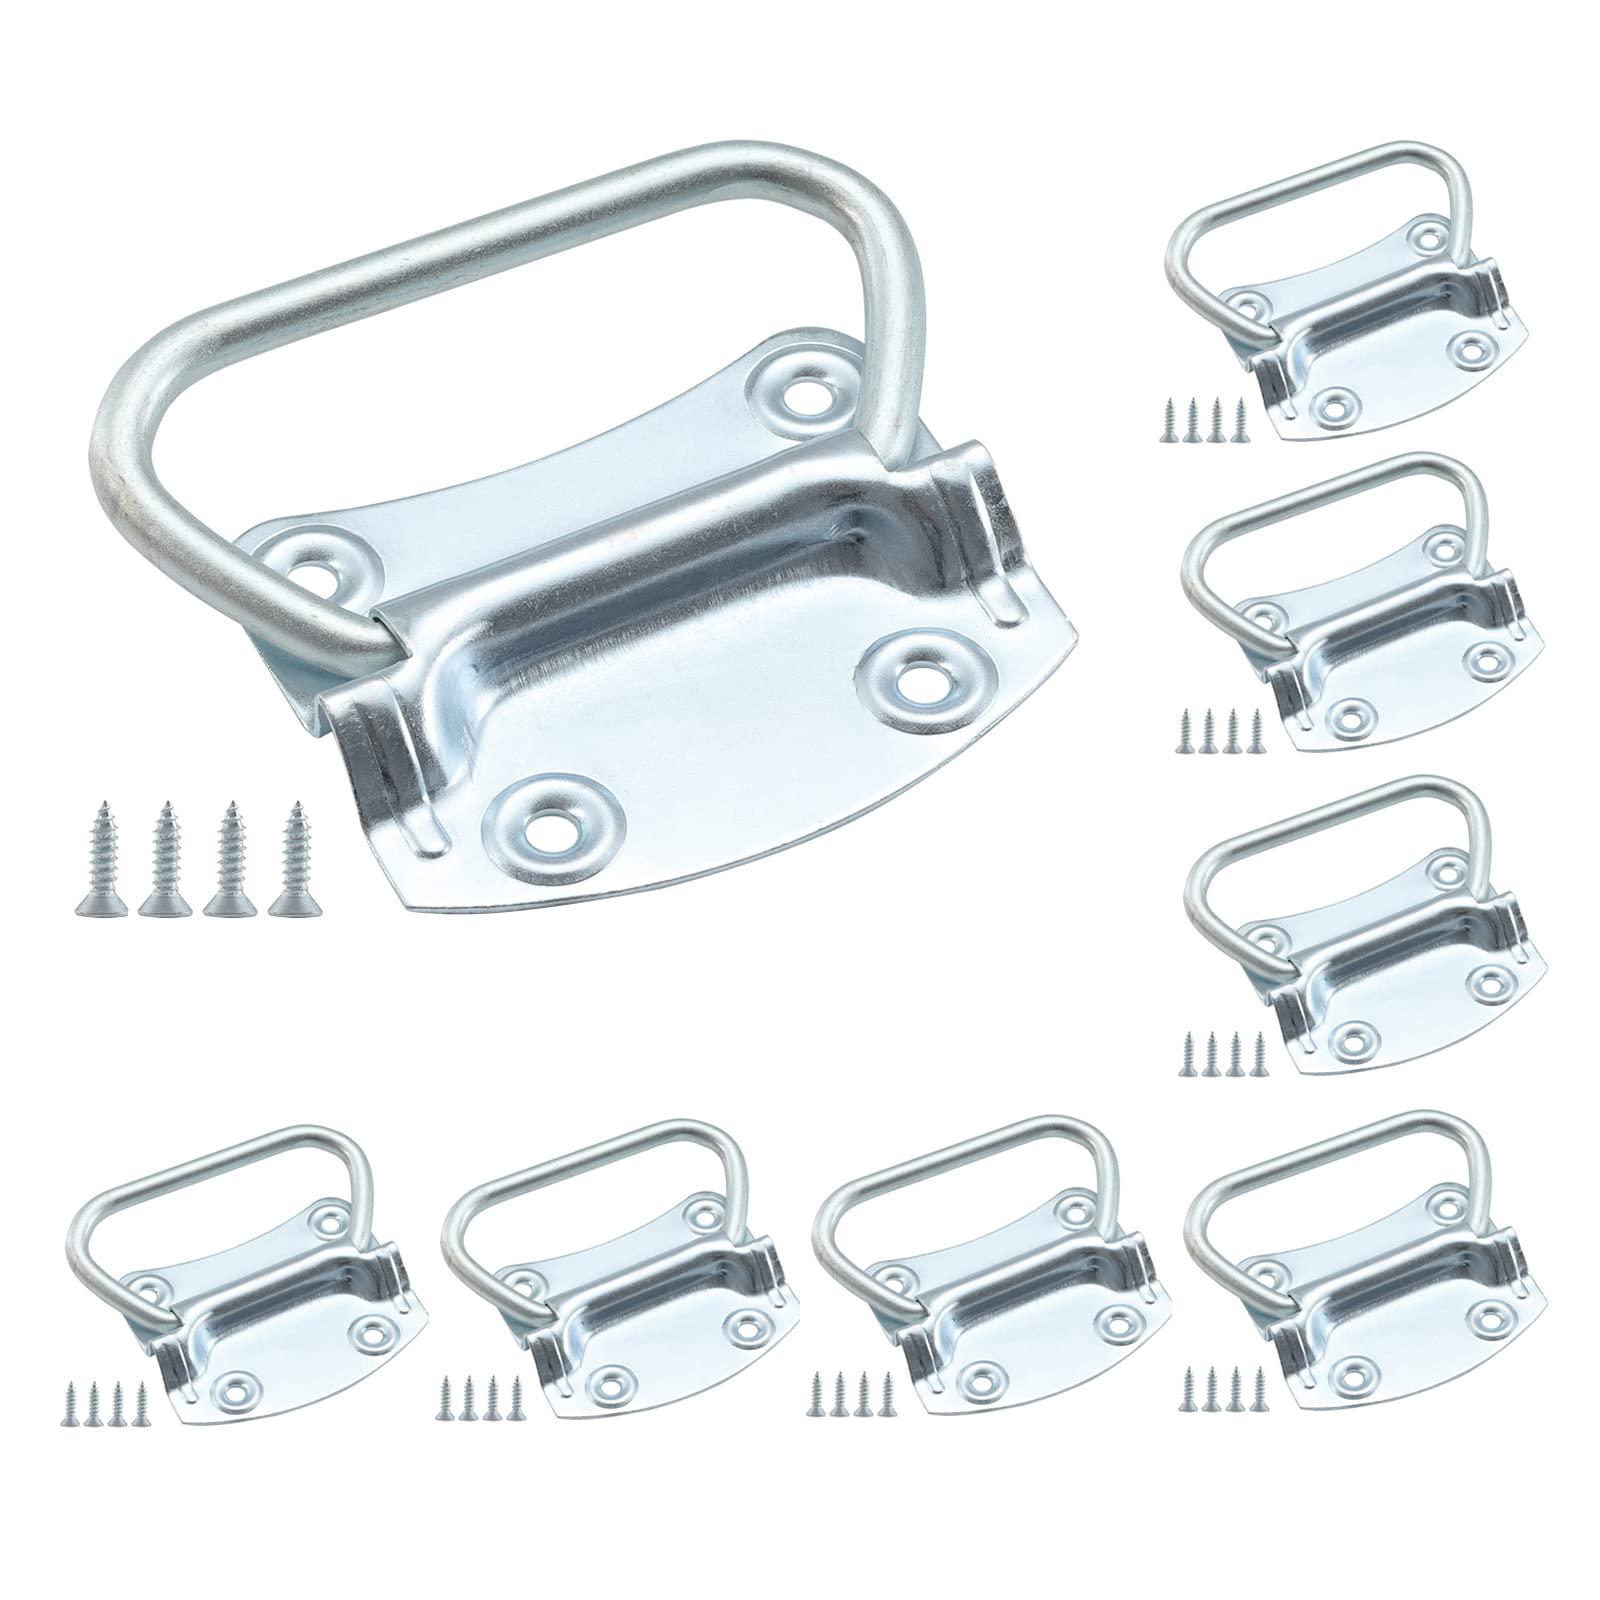 home master hardware 3-1/2 inch pull ring handle toolbox lifting door case chest pull handles zinc plated 8 pack